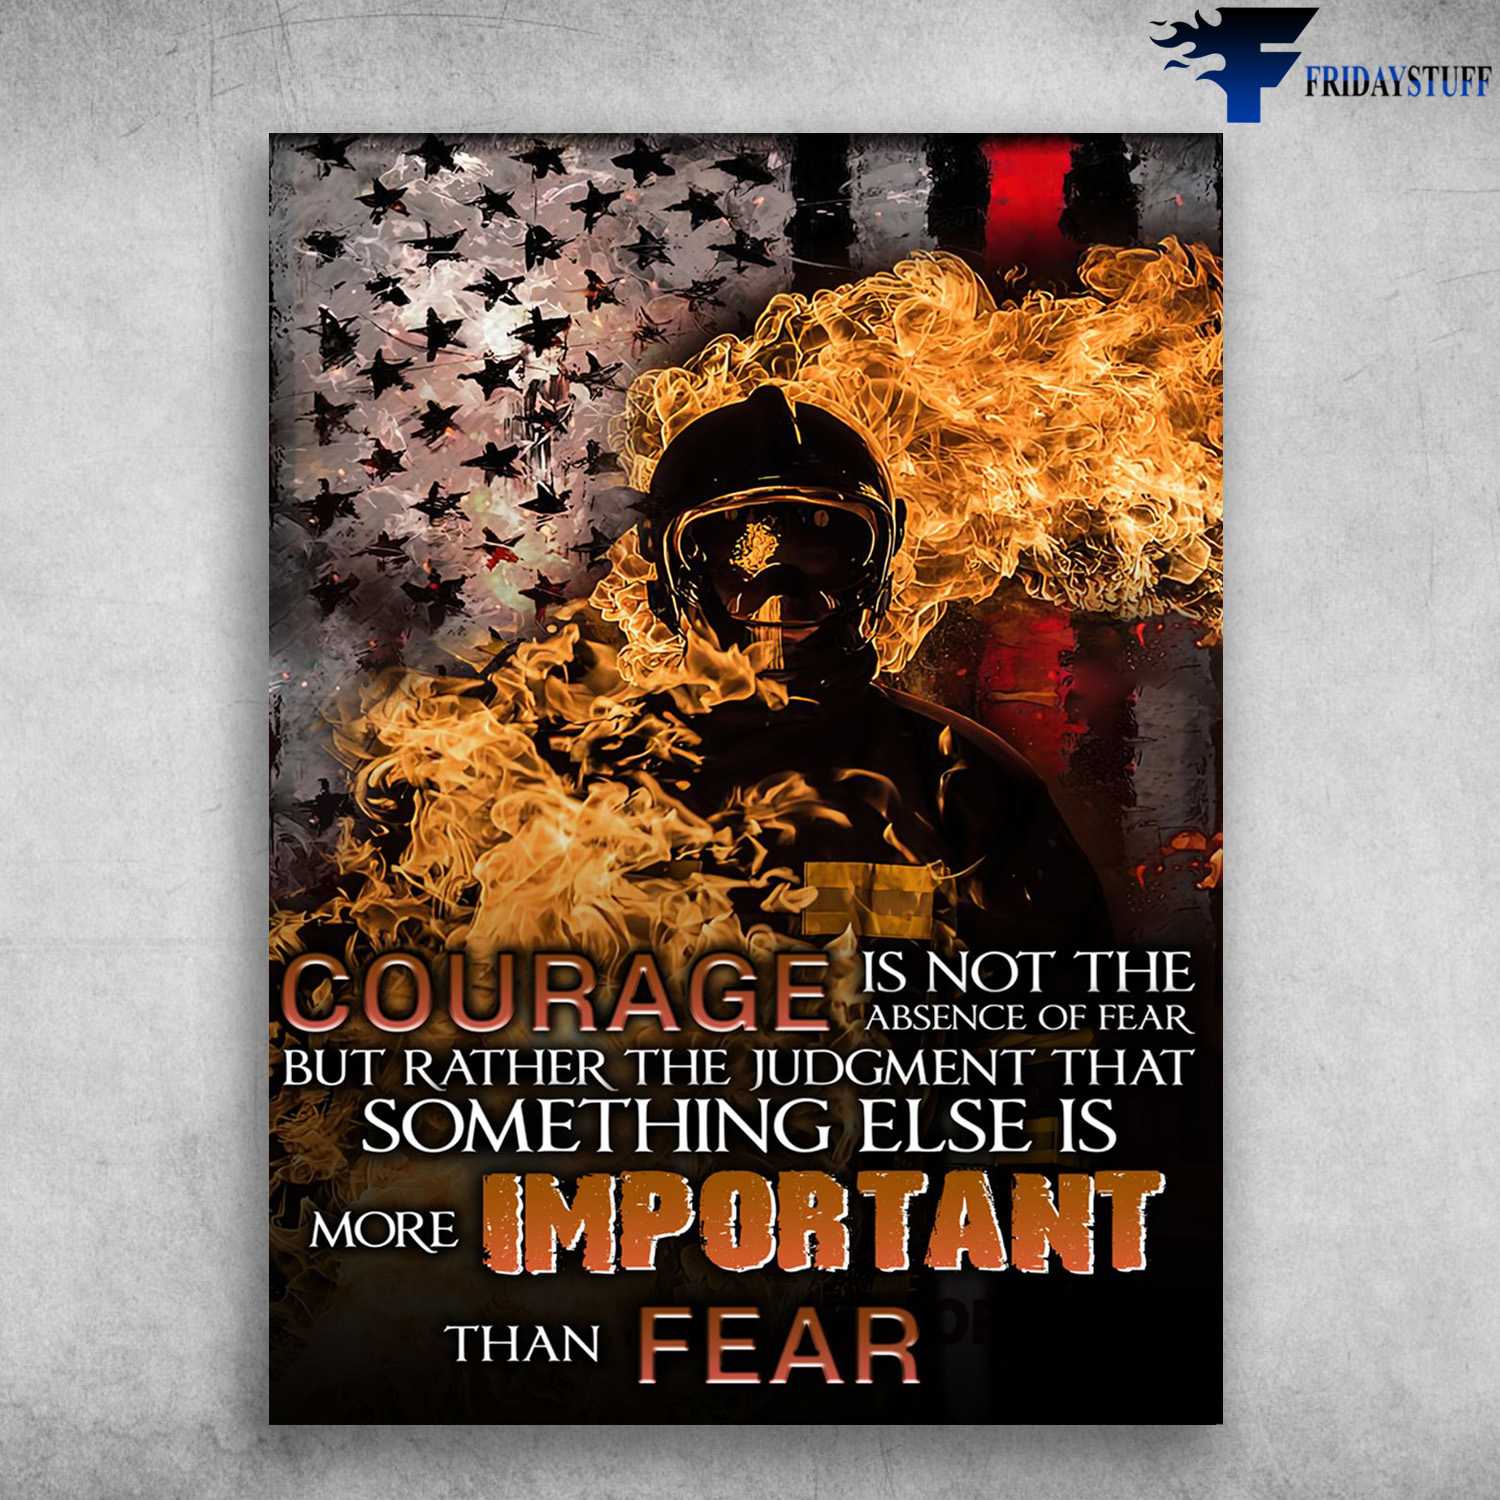 Firefighter Poster, American Firefight, Courage Is Not The Absence Of Fear, Bur Rather The Judgment That, Something Else Is More Important Than Fear